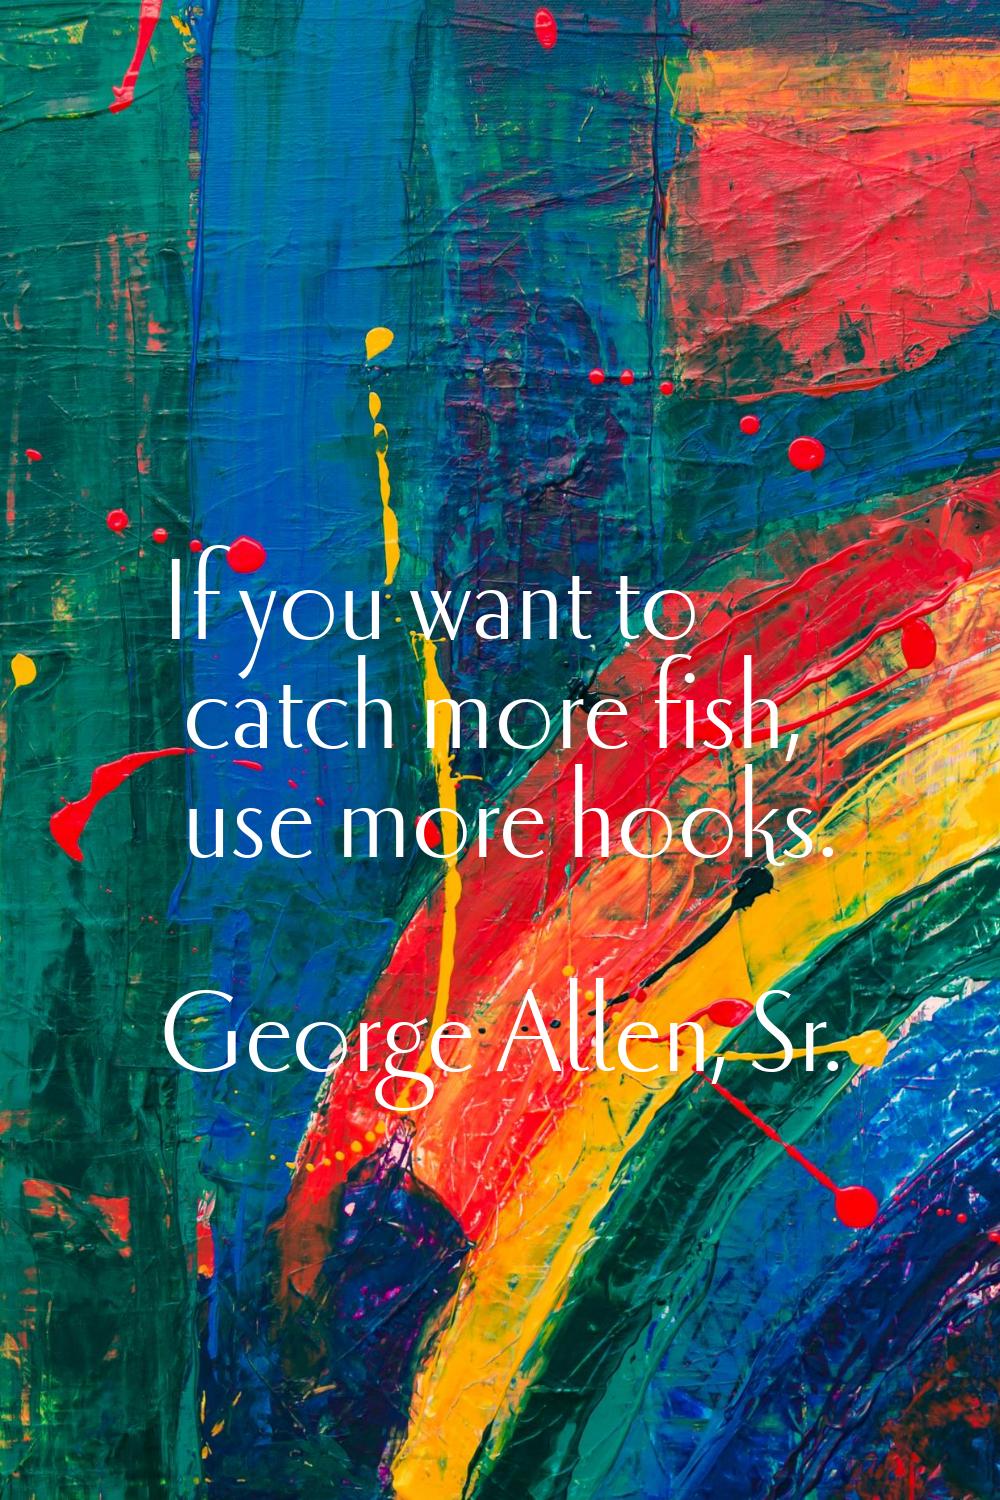 If you want to catch more fish, use more hooks.